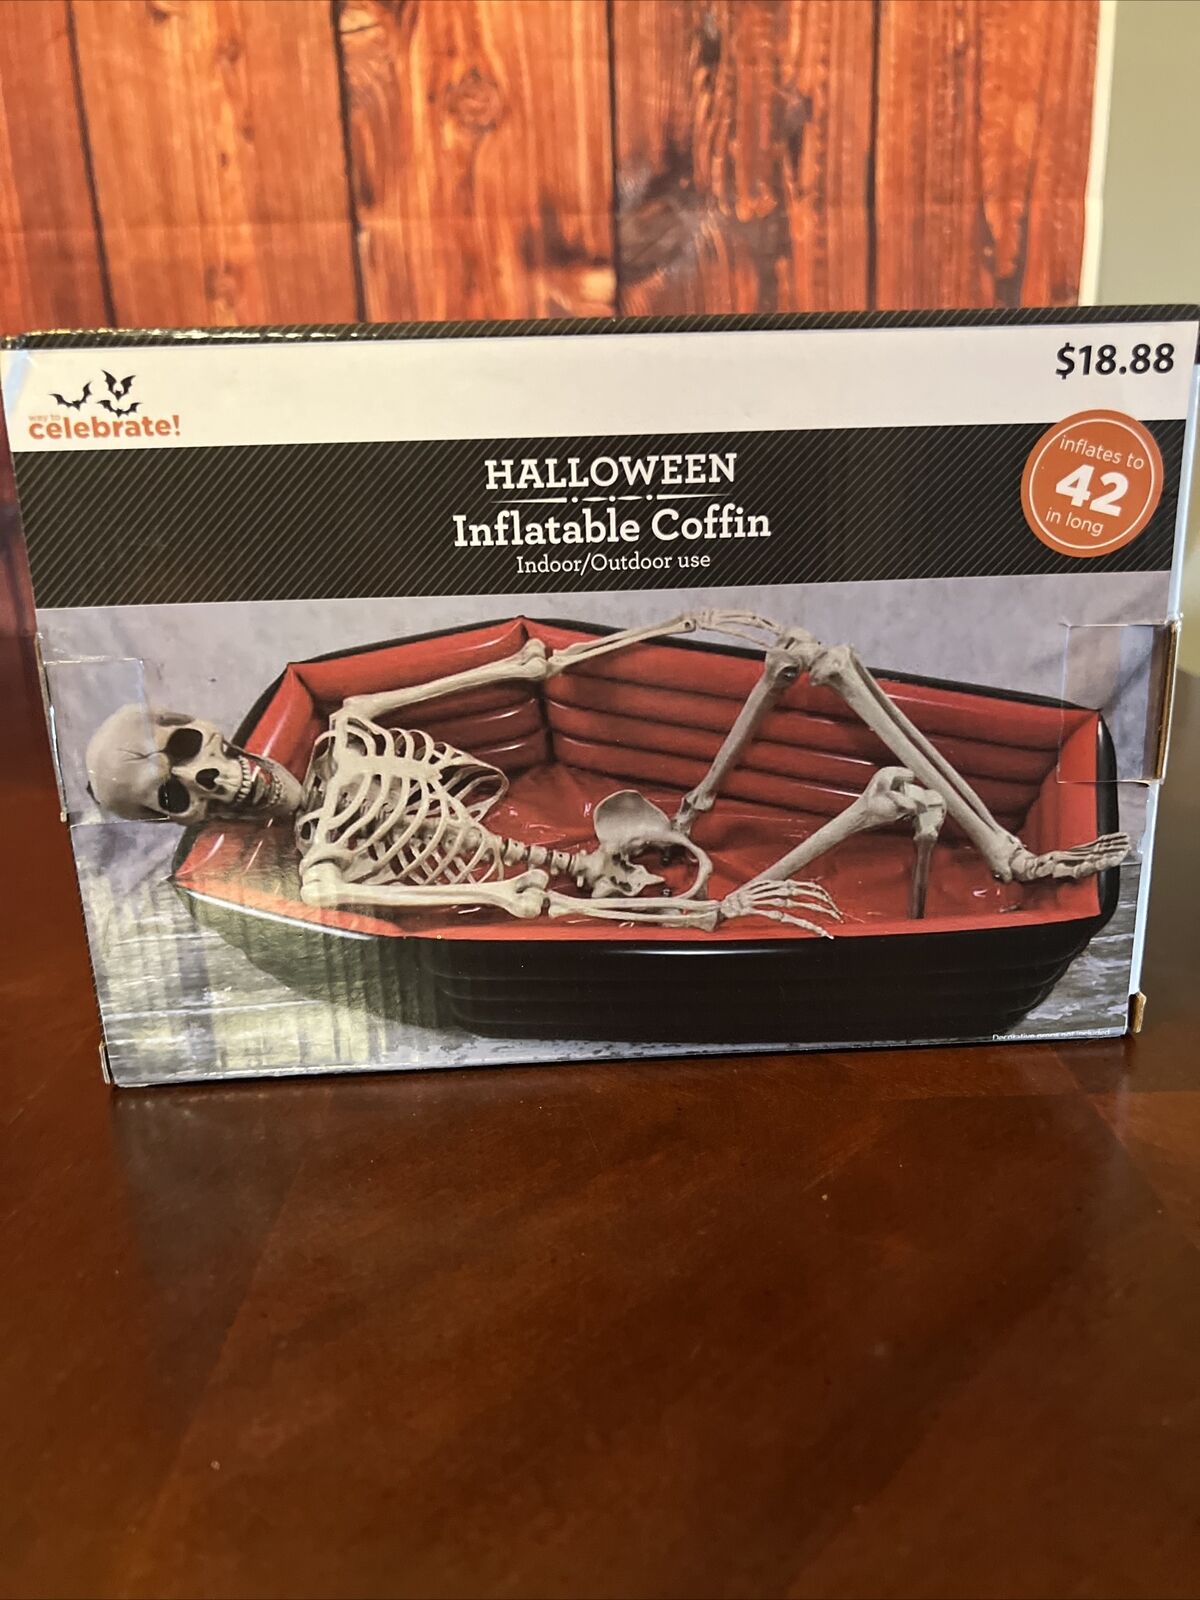 WAY TO CELEBRATE HALLOWEEN AIRBLOWN INFLATABLE 42 INCH INFLATABLE COFFIN 